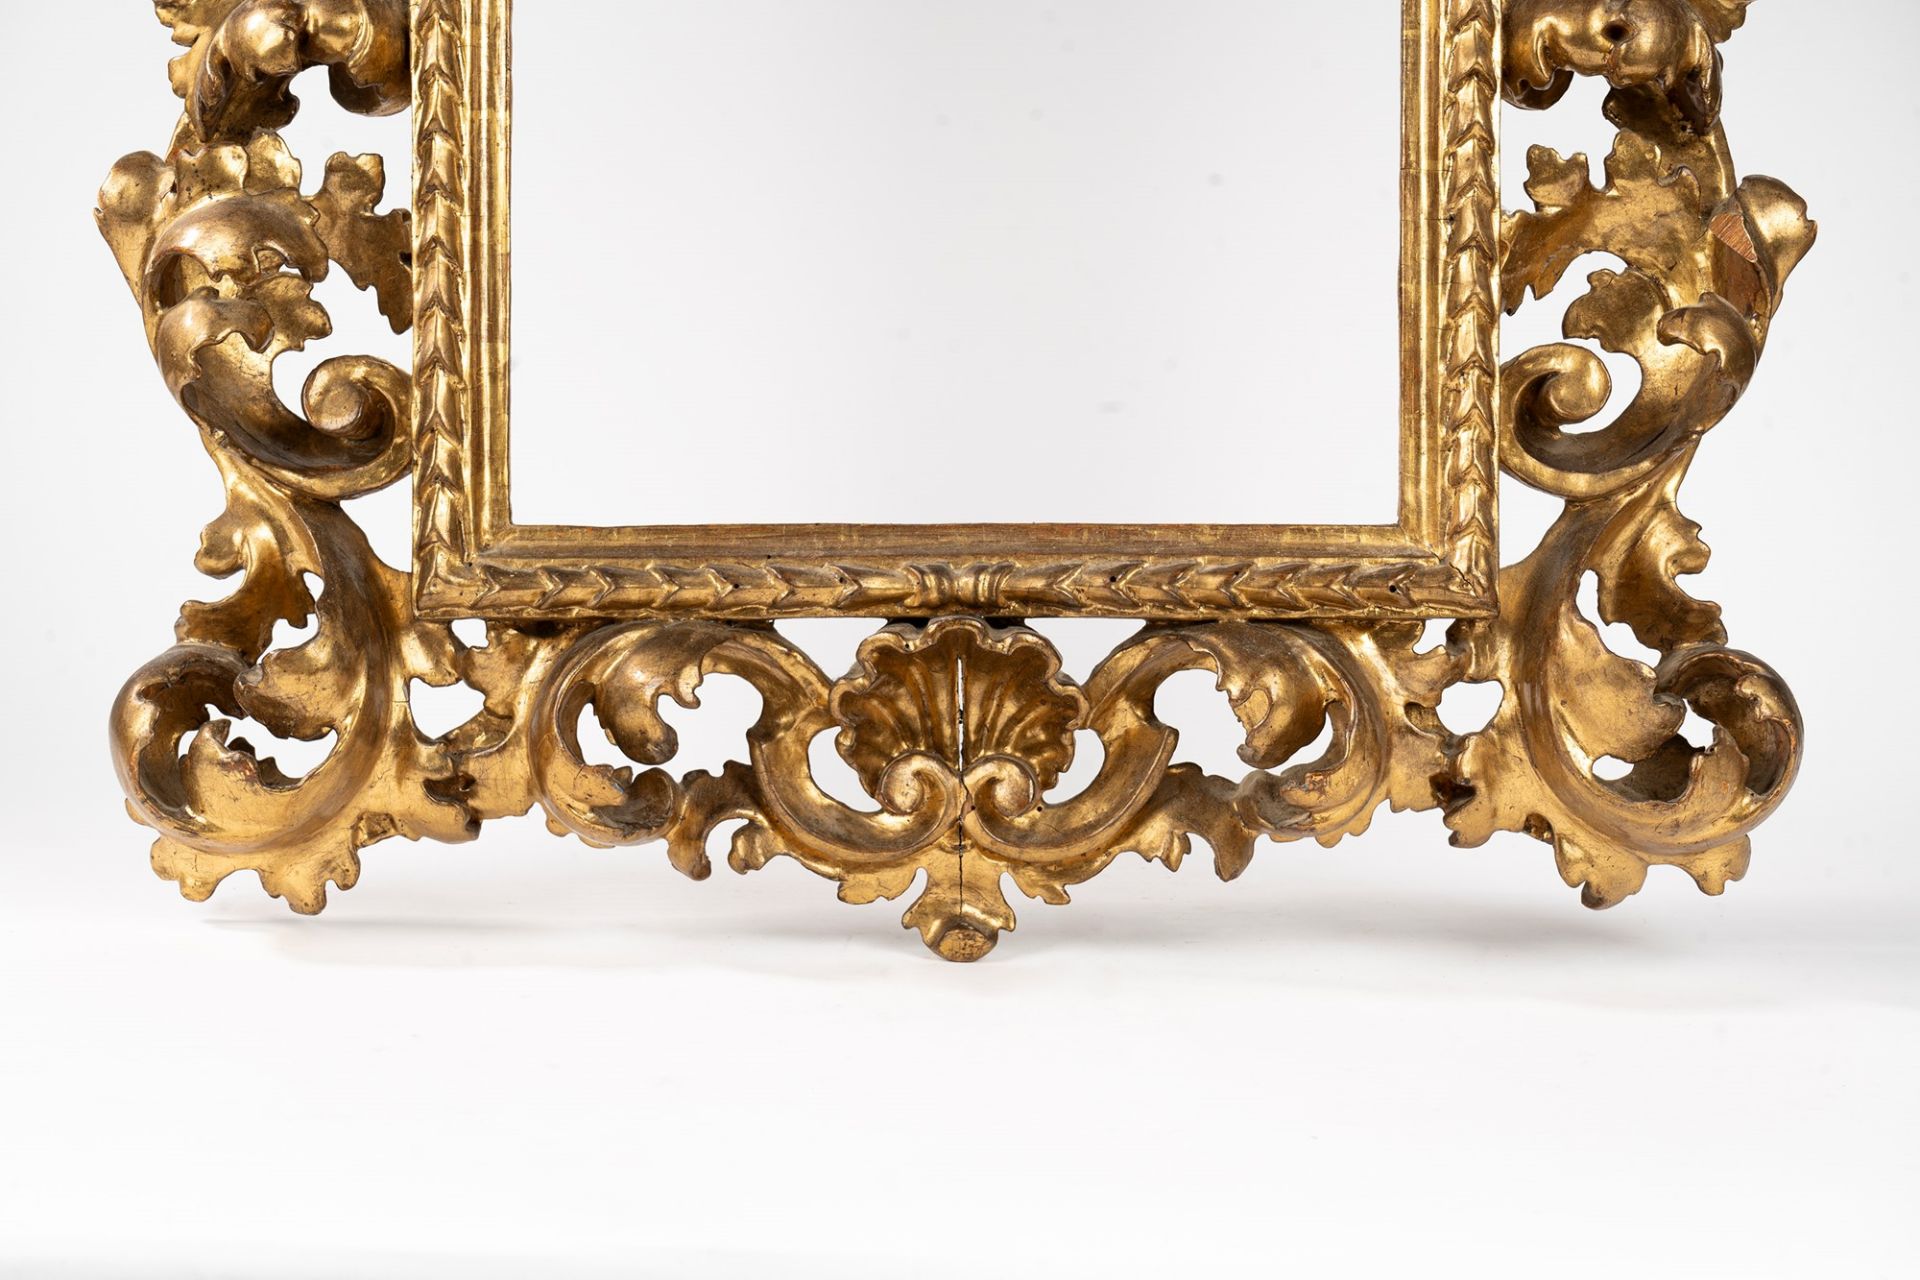 Carved and gilded wood frame, 19th century - Image 6 of 7